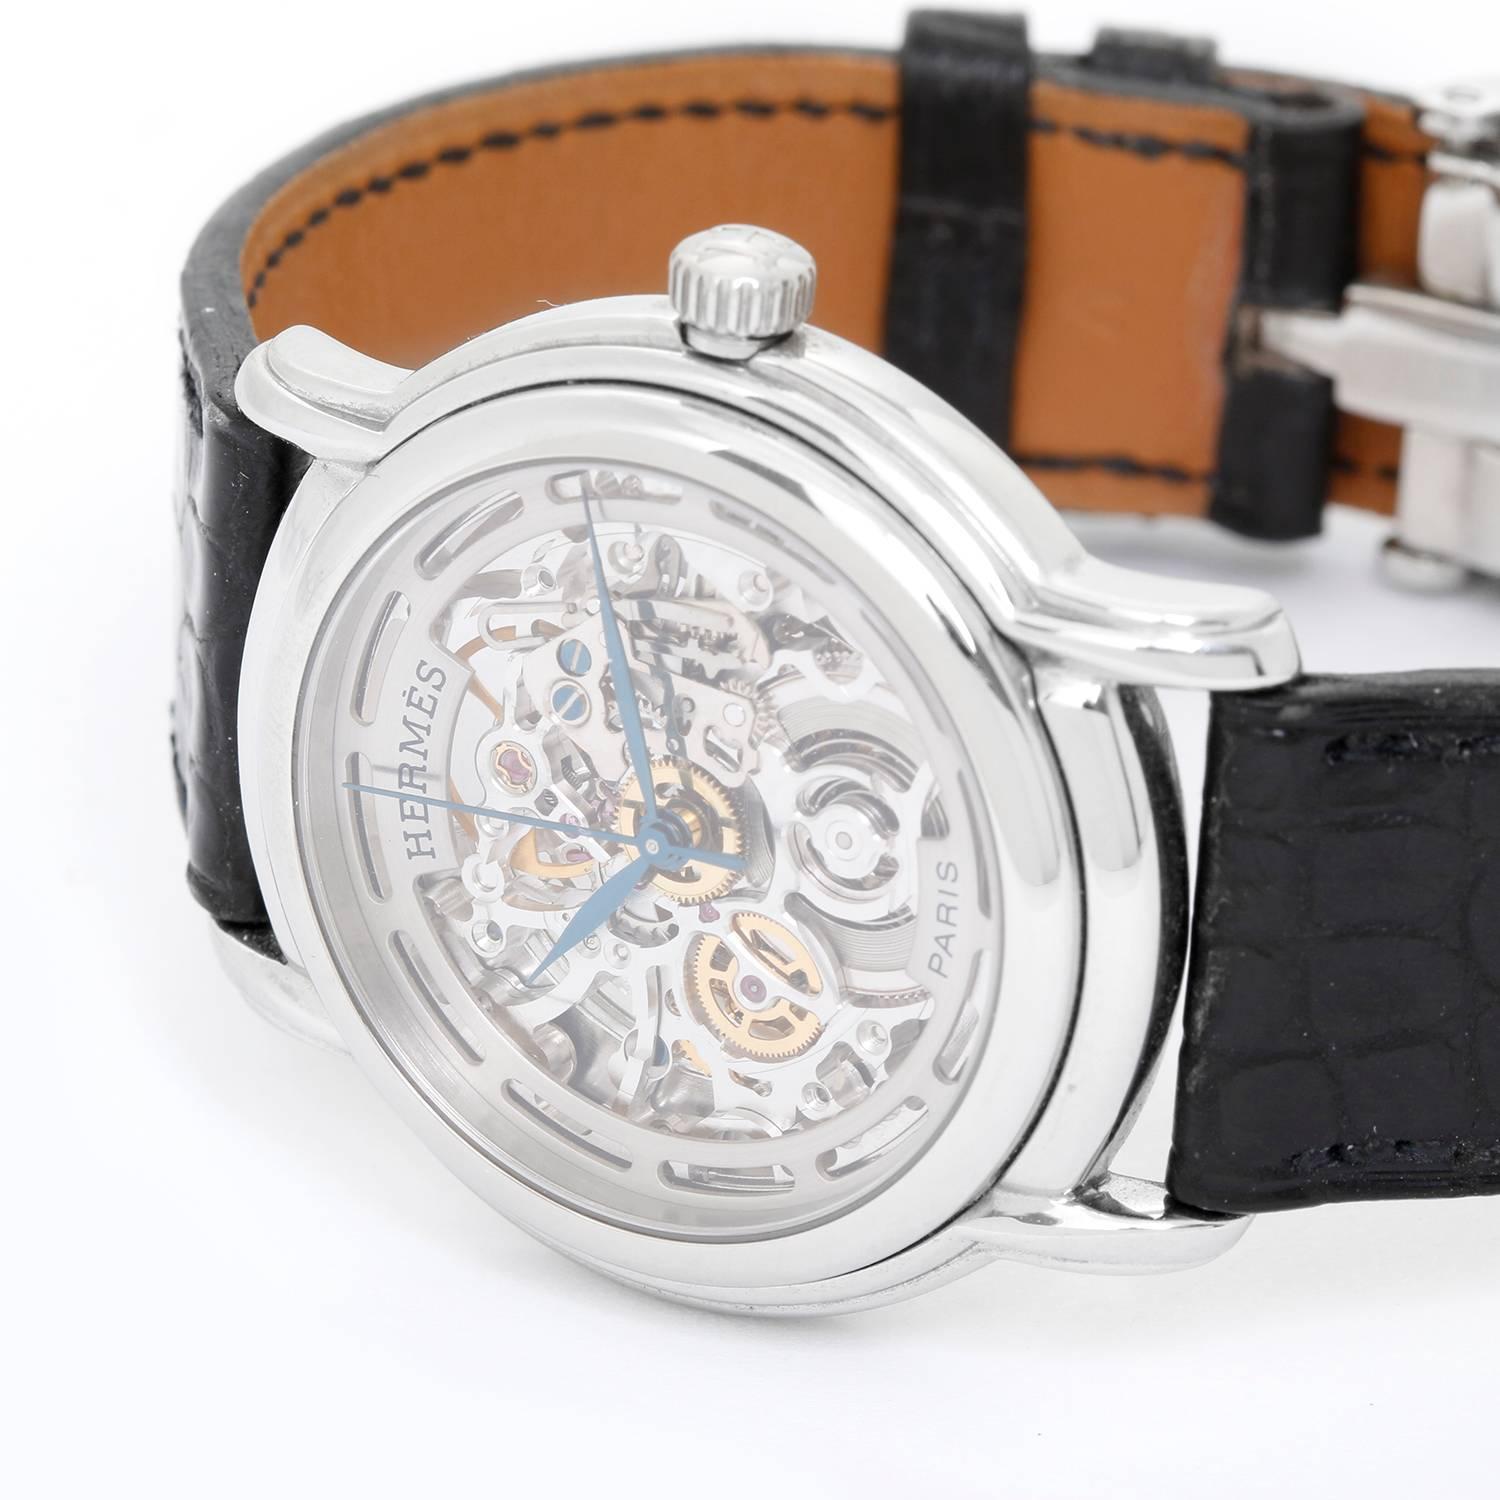 Hermes Stainless Steel Sesame TGM Skeleton Watch Ref. SM1.710 -  Automatic winding. Stainless steel case (36mm). Silver skeletonized dial with blue hands. Black strap band with stainless steel Hermes deployant buckle. Pre-owned with box and papers.